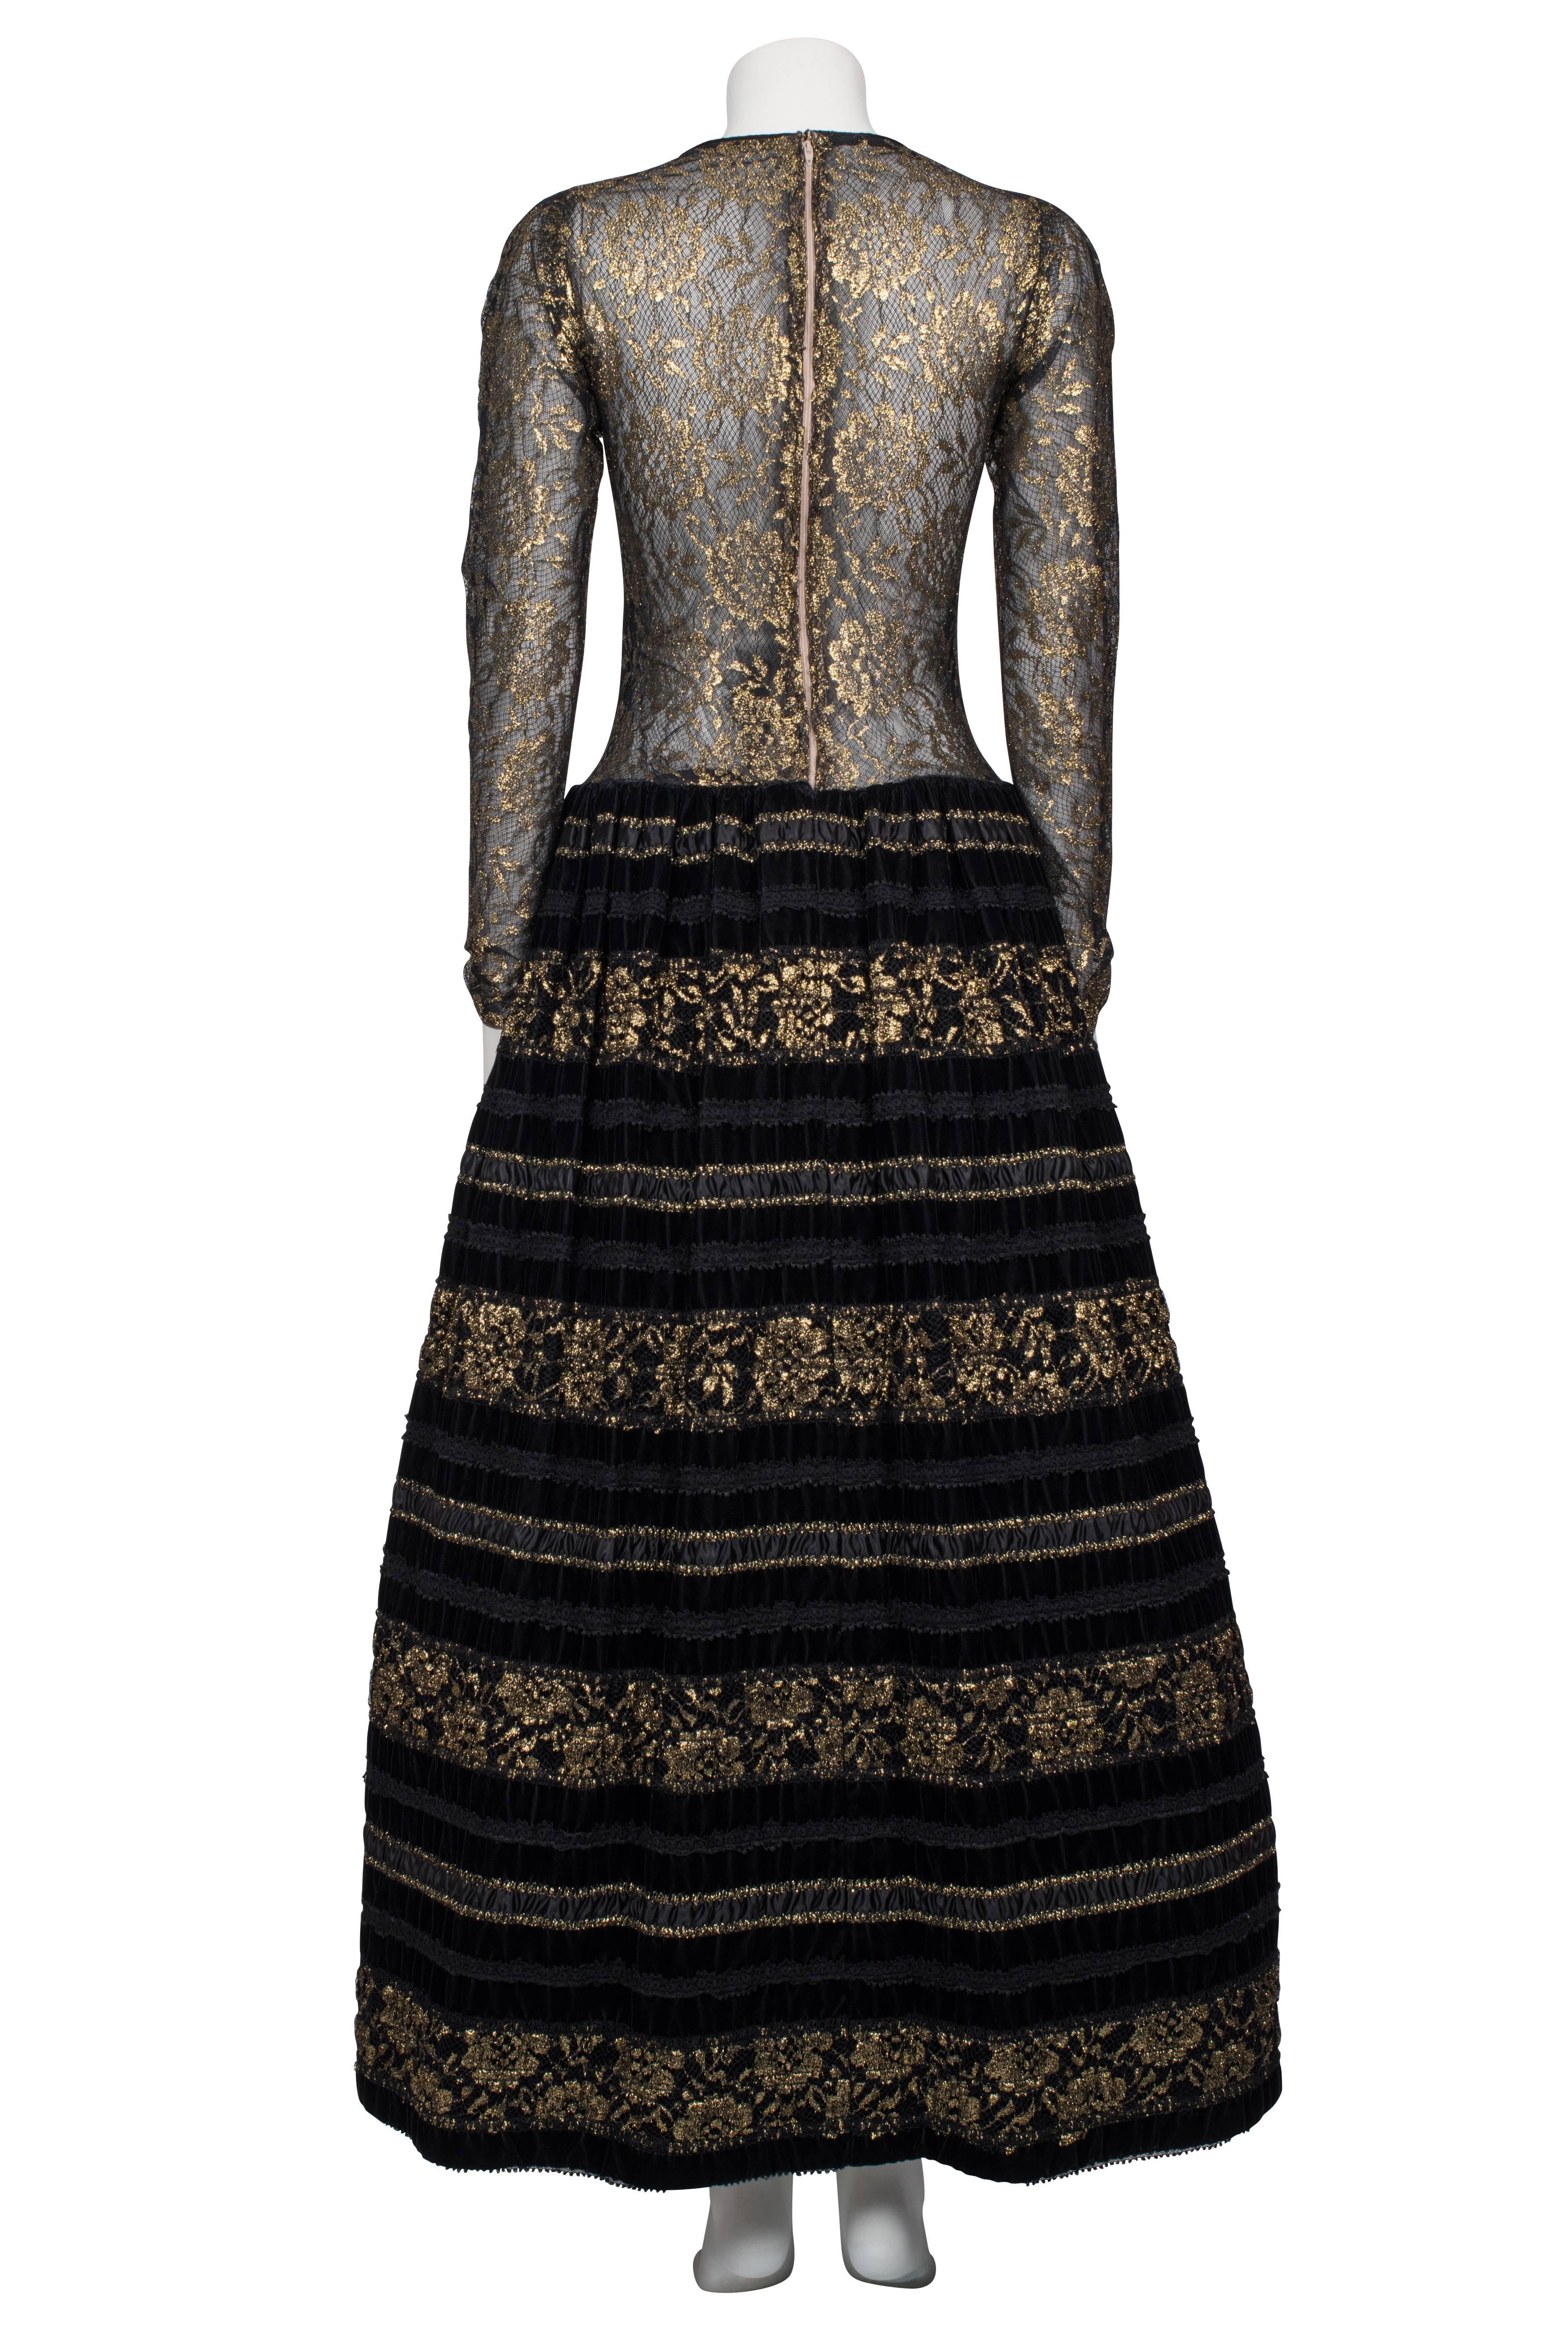 1960's Arnold Scaasi Couture Black Velvet and Gold Lace Gown For Sale 1